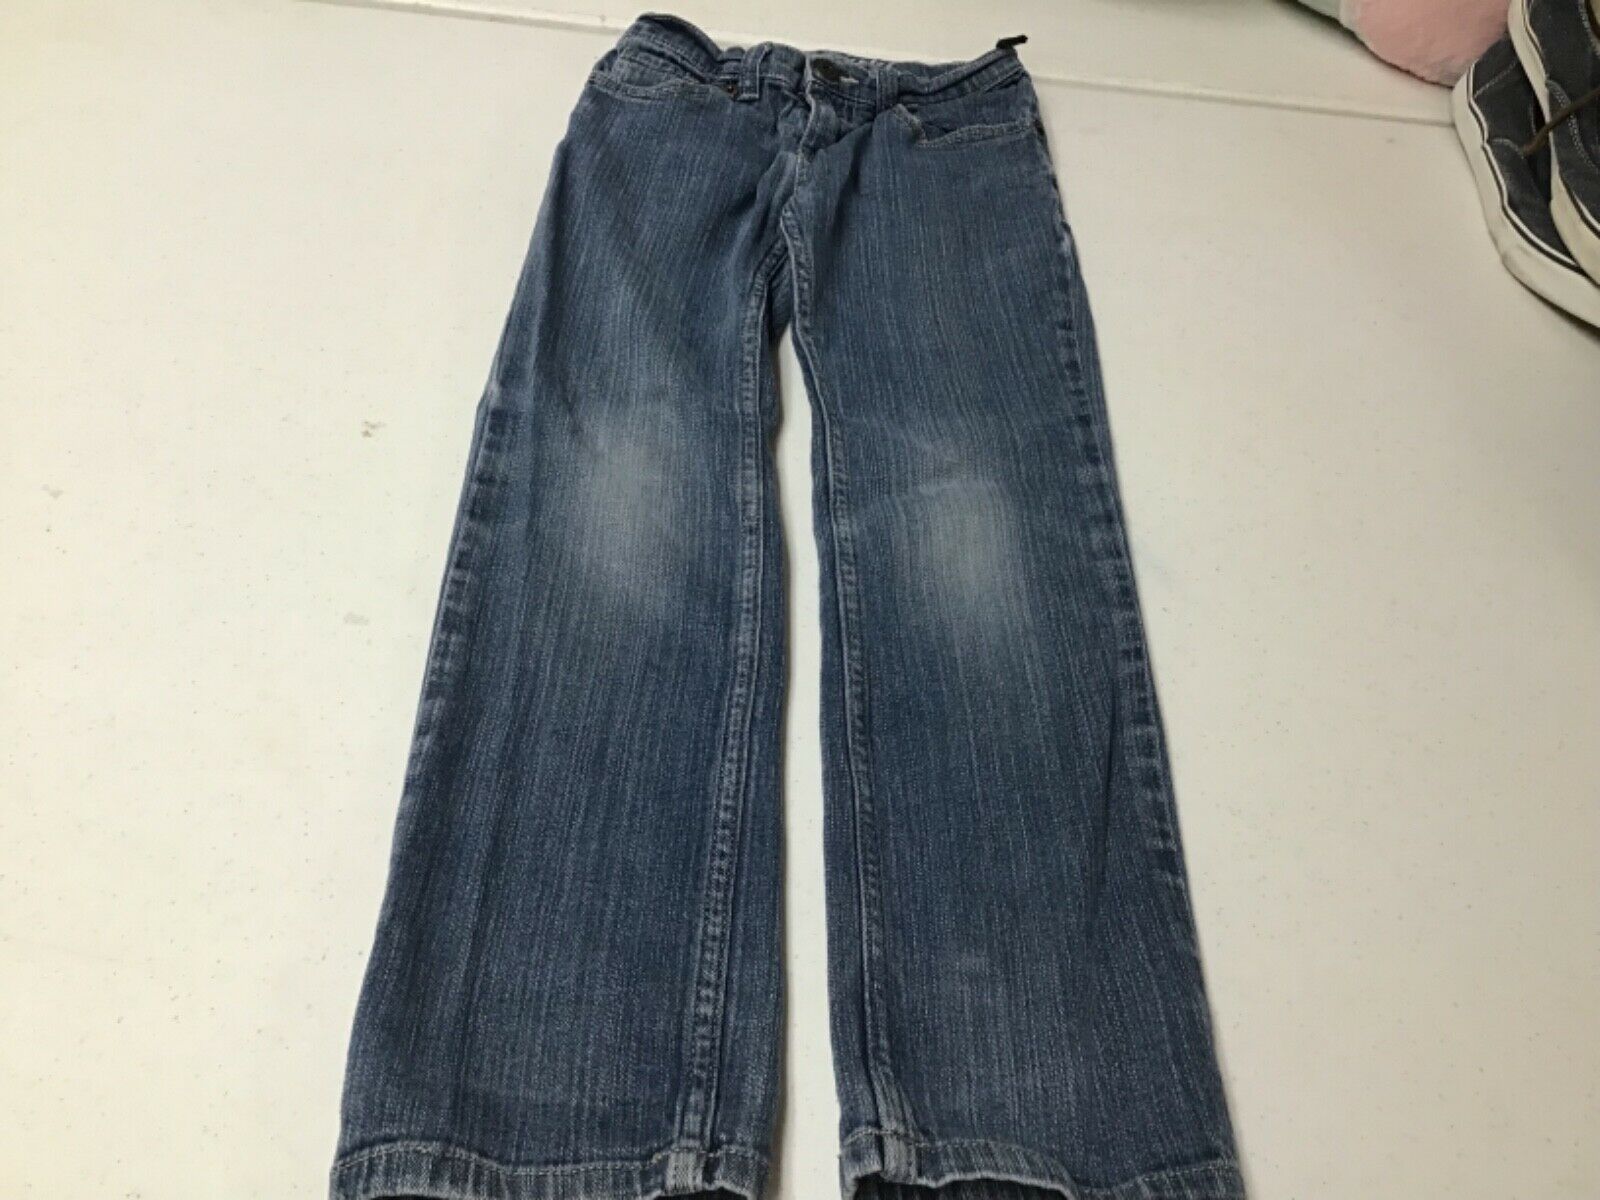 Crazy 8 - Jeans - Girls - Size 7 - Straight Blue Jeans